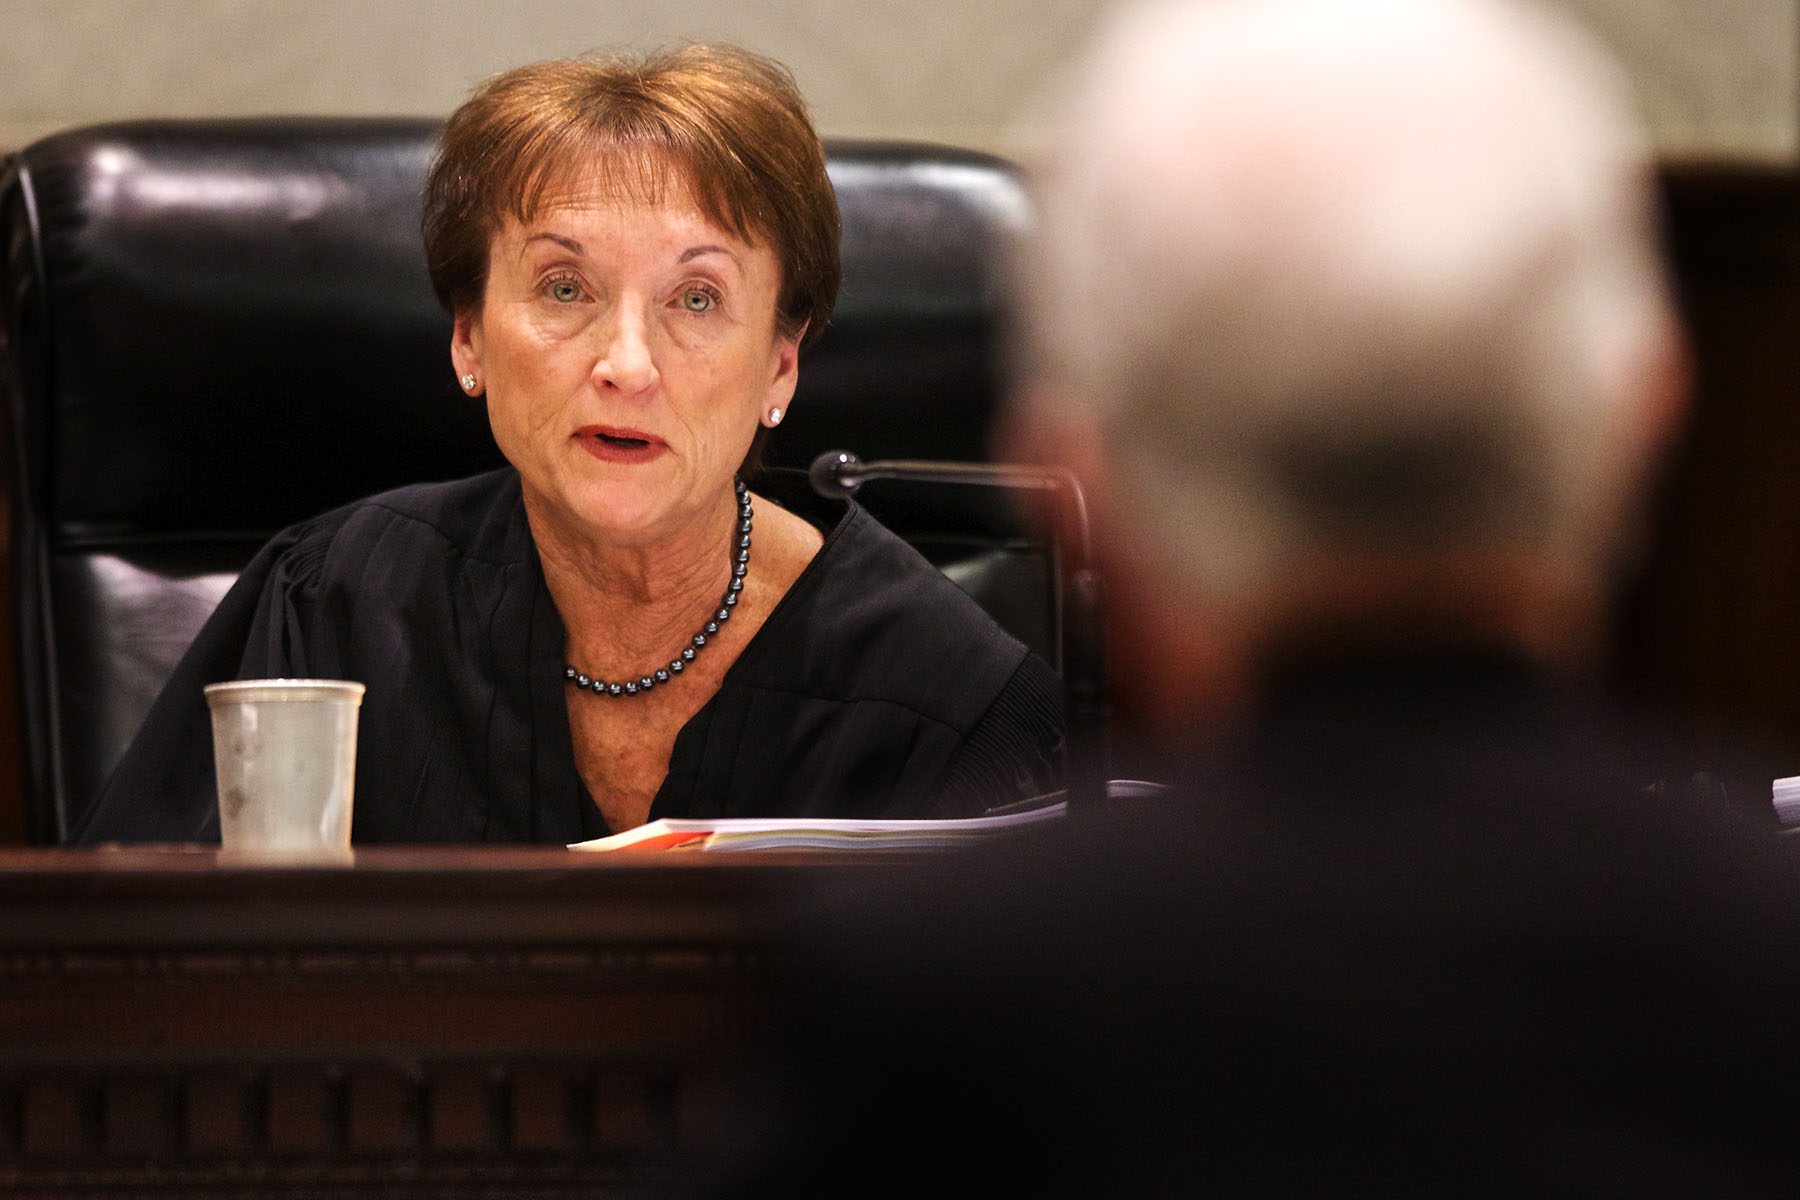 South Carolina Supreme Court Justice Kaye Hearn. She is sitting and speaking to a man whose back is turned to the camera in the foreground.